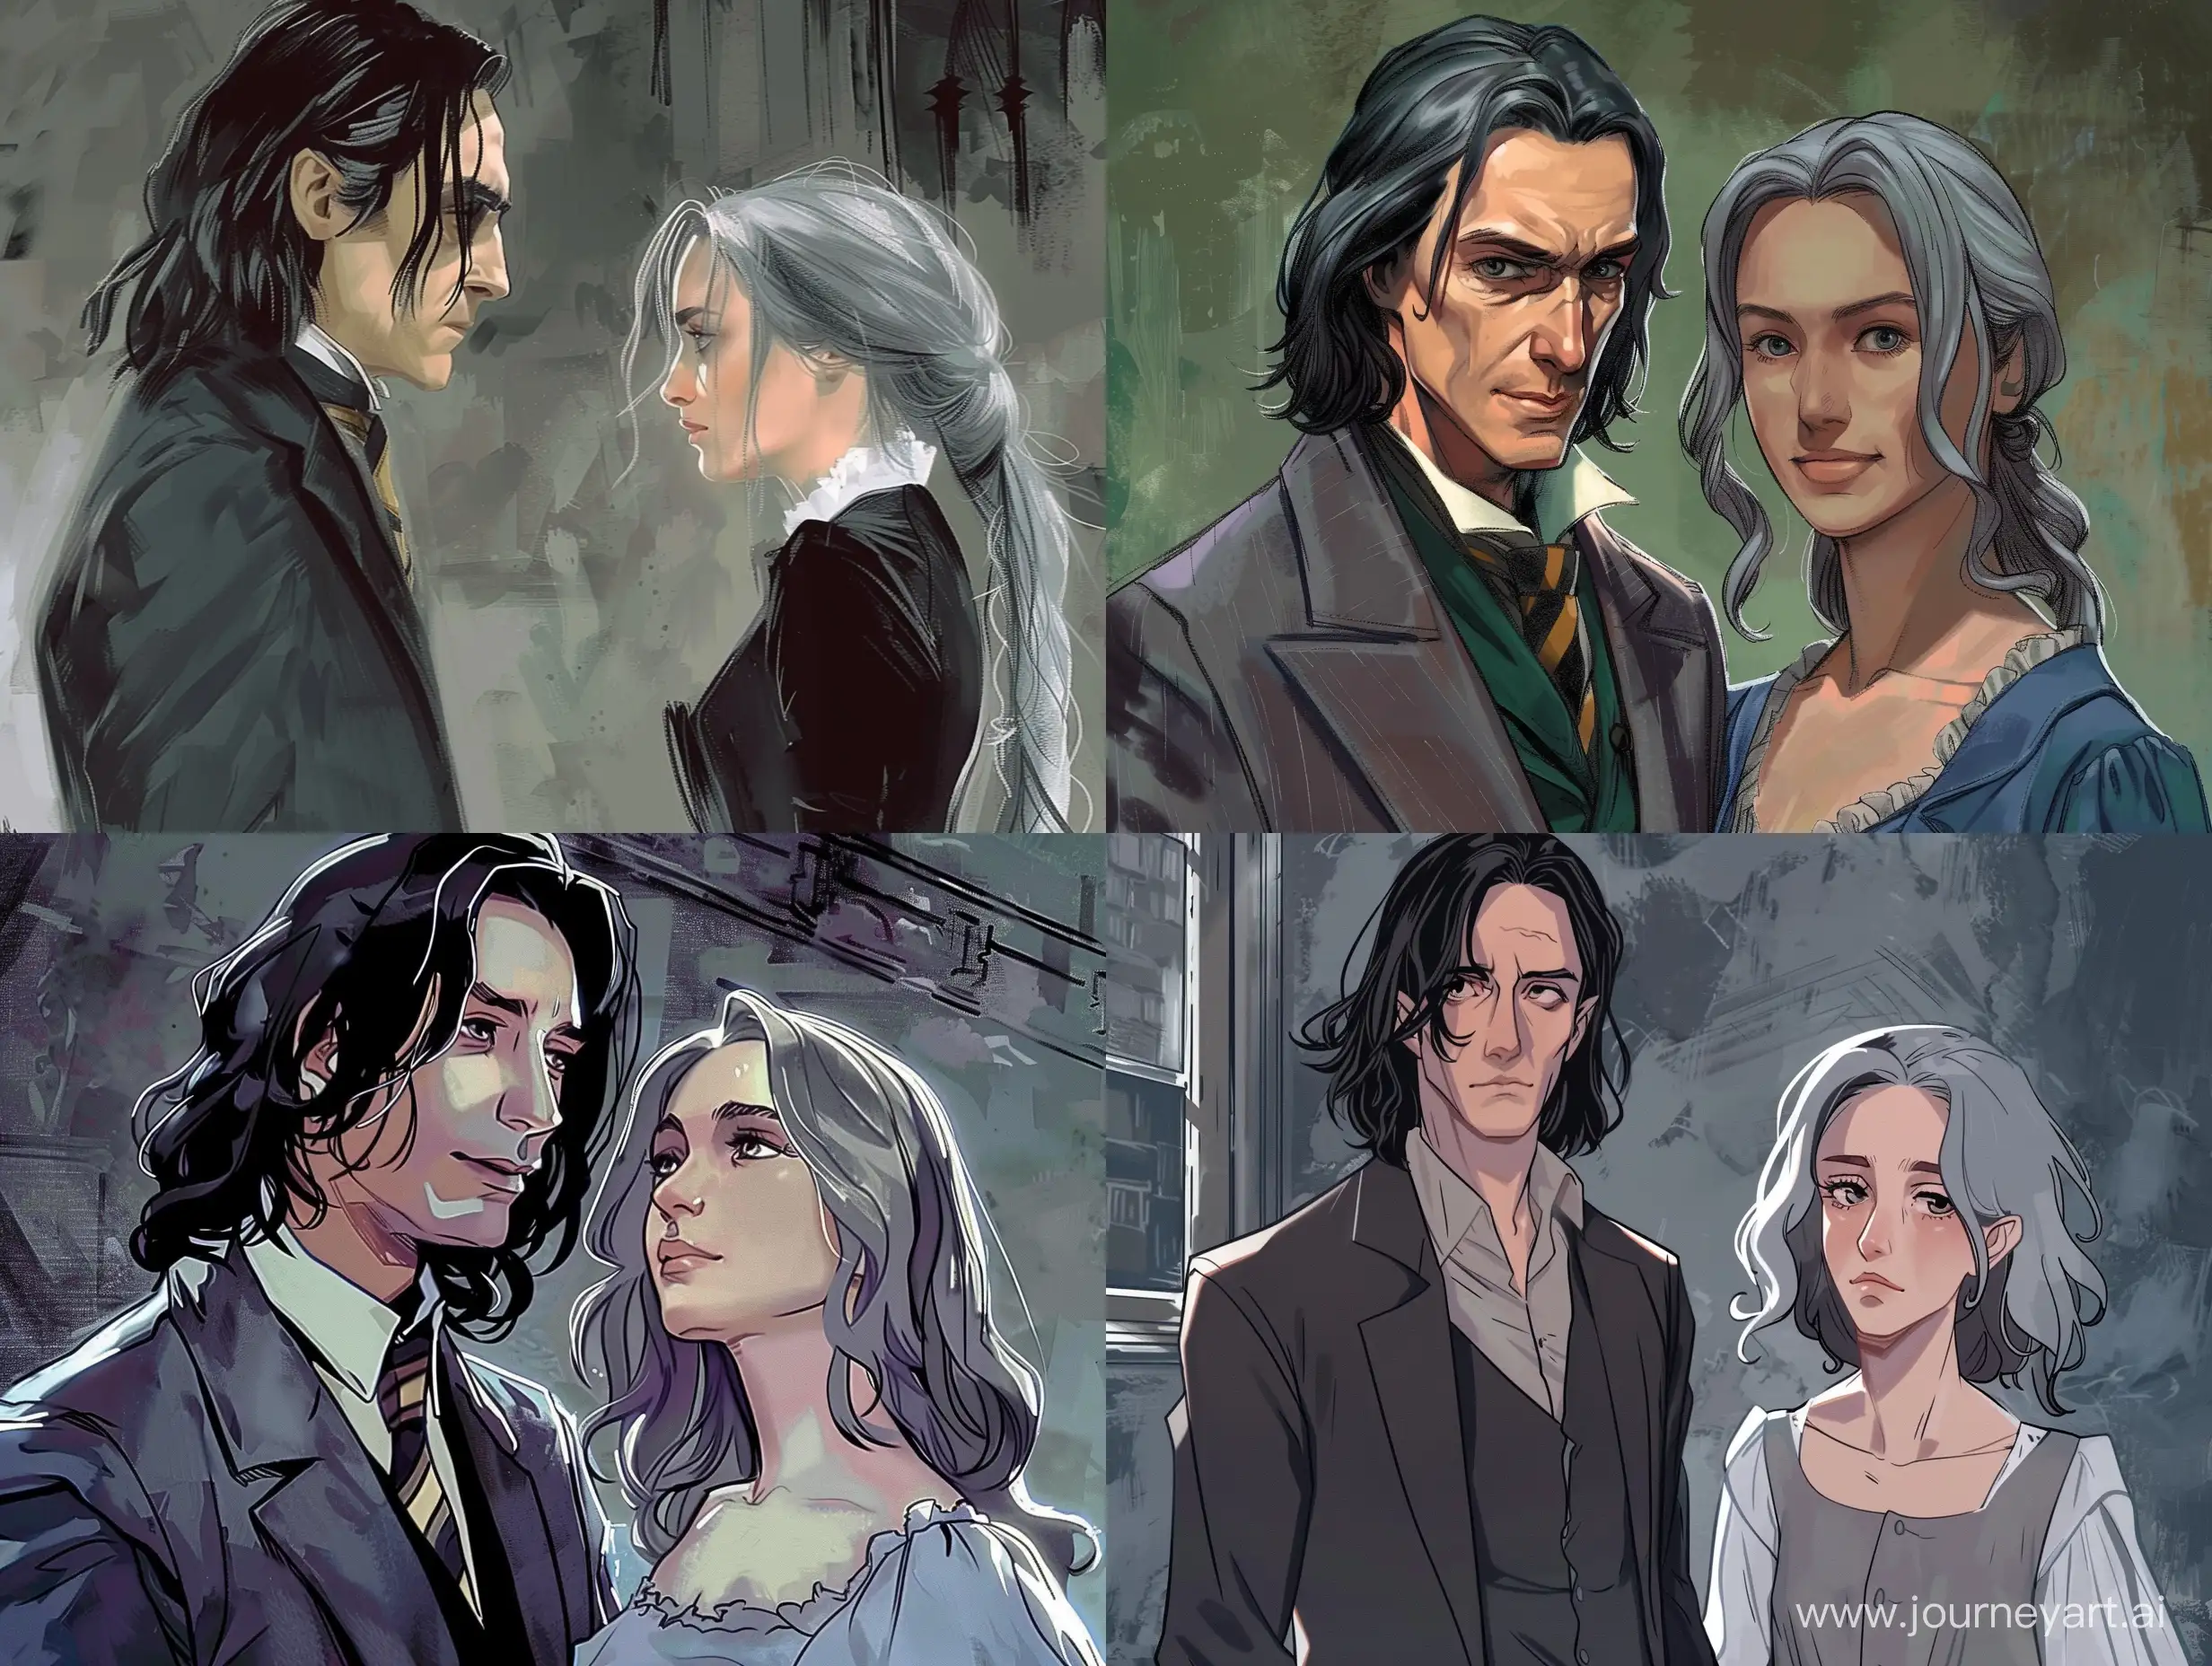 Severus-Snape-and-GrayHaired-Woman-in-Classic-Suit-Artistic-Portrait-by-Jenny-Frison